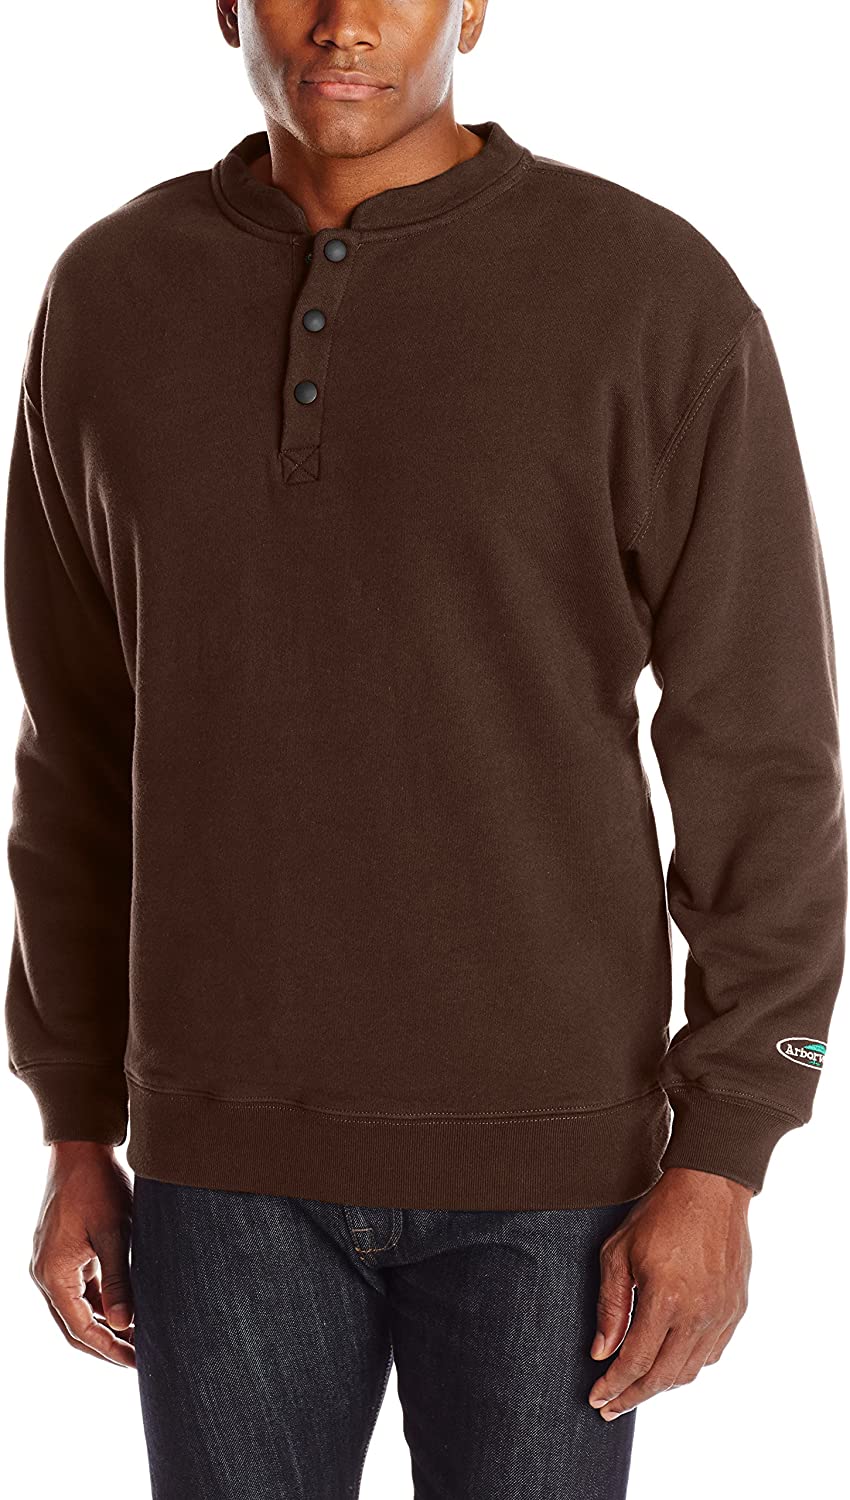 Arborwear Men's Double Thick Crew Sweatshirt in Chestnut from the from